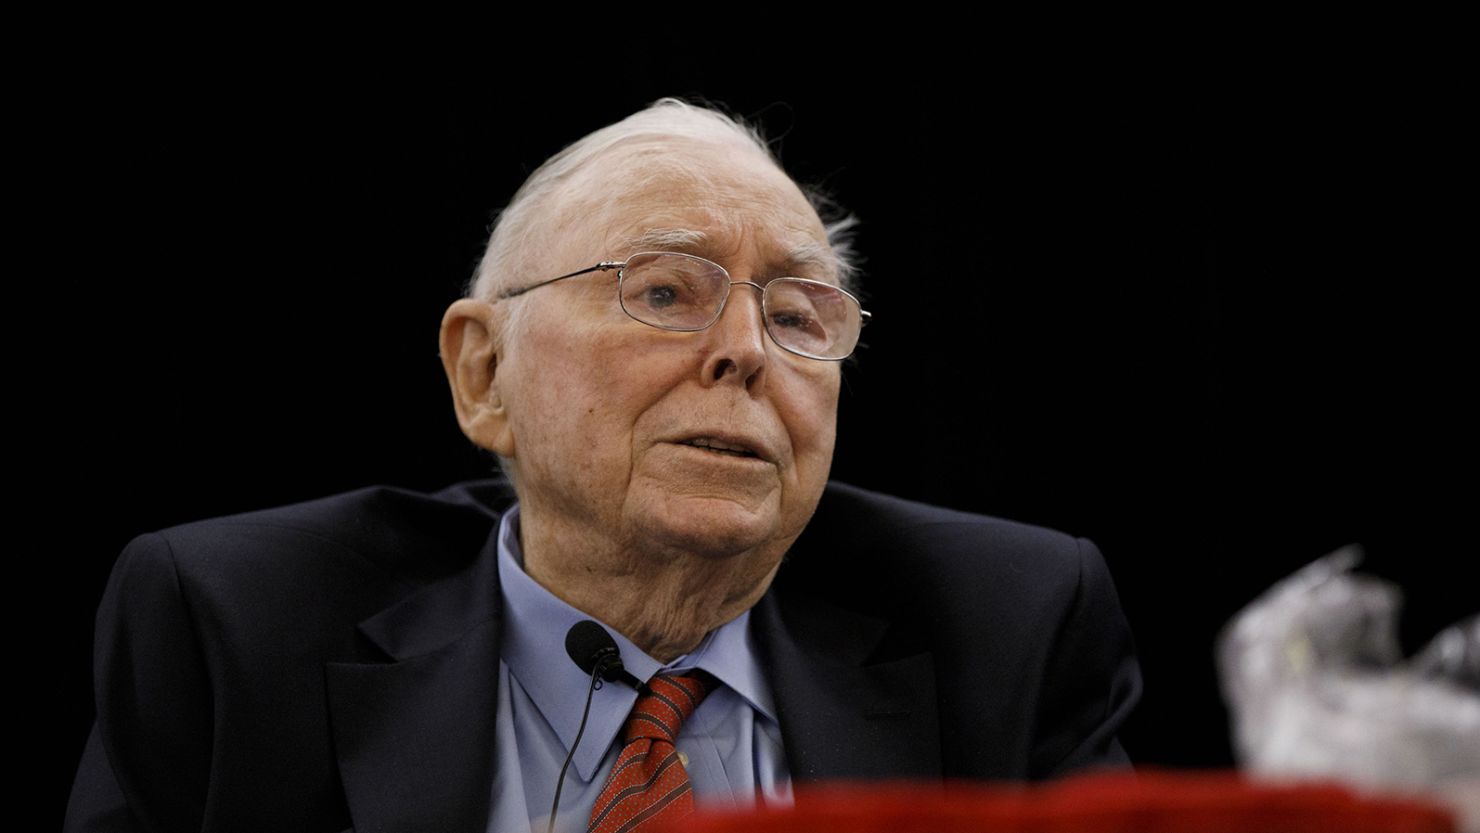 Charlie Munger, vice chairman of Berkshire Hathaway Inc., speaks during the Daily Journal Corp. shareholder meeting in Los Angeles, California, U.S., on Thursday, Feb. 14, 2019.